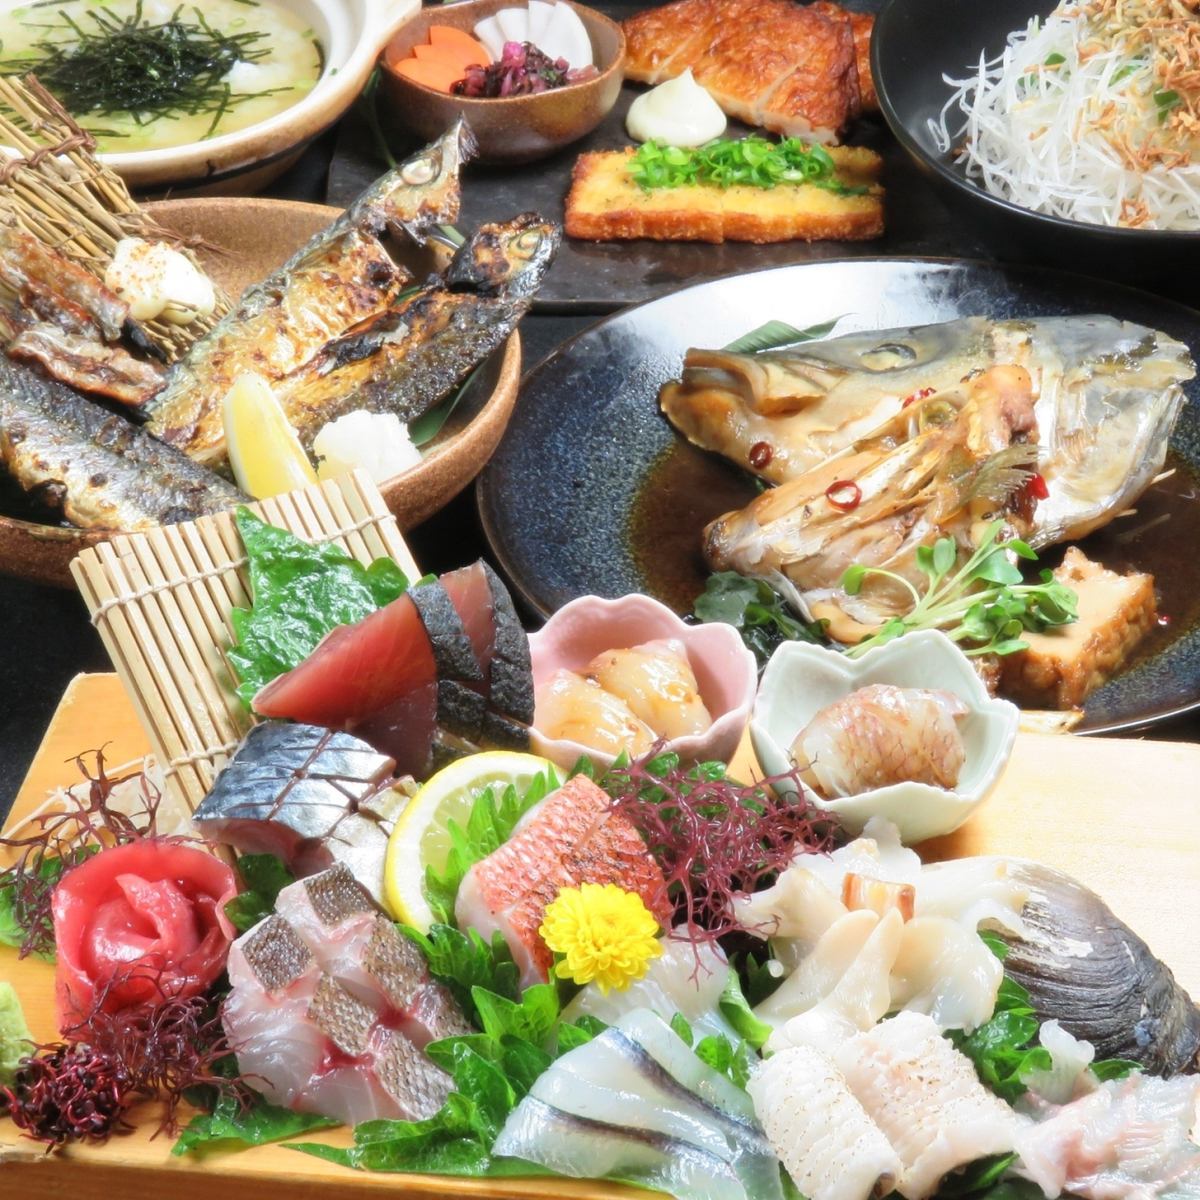 Enjoy the fresh fish from Setouchi that only Dedo, which is directly managed by a fish store, can offer.